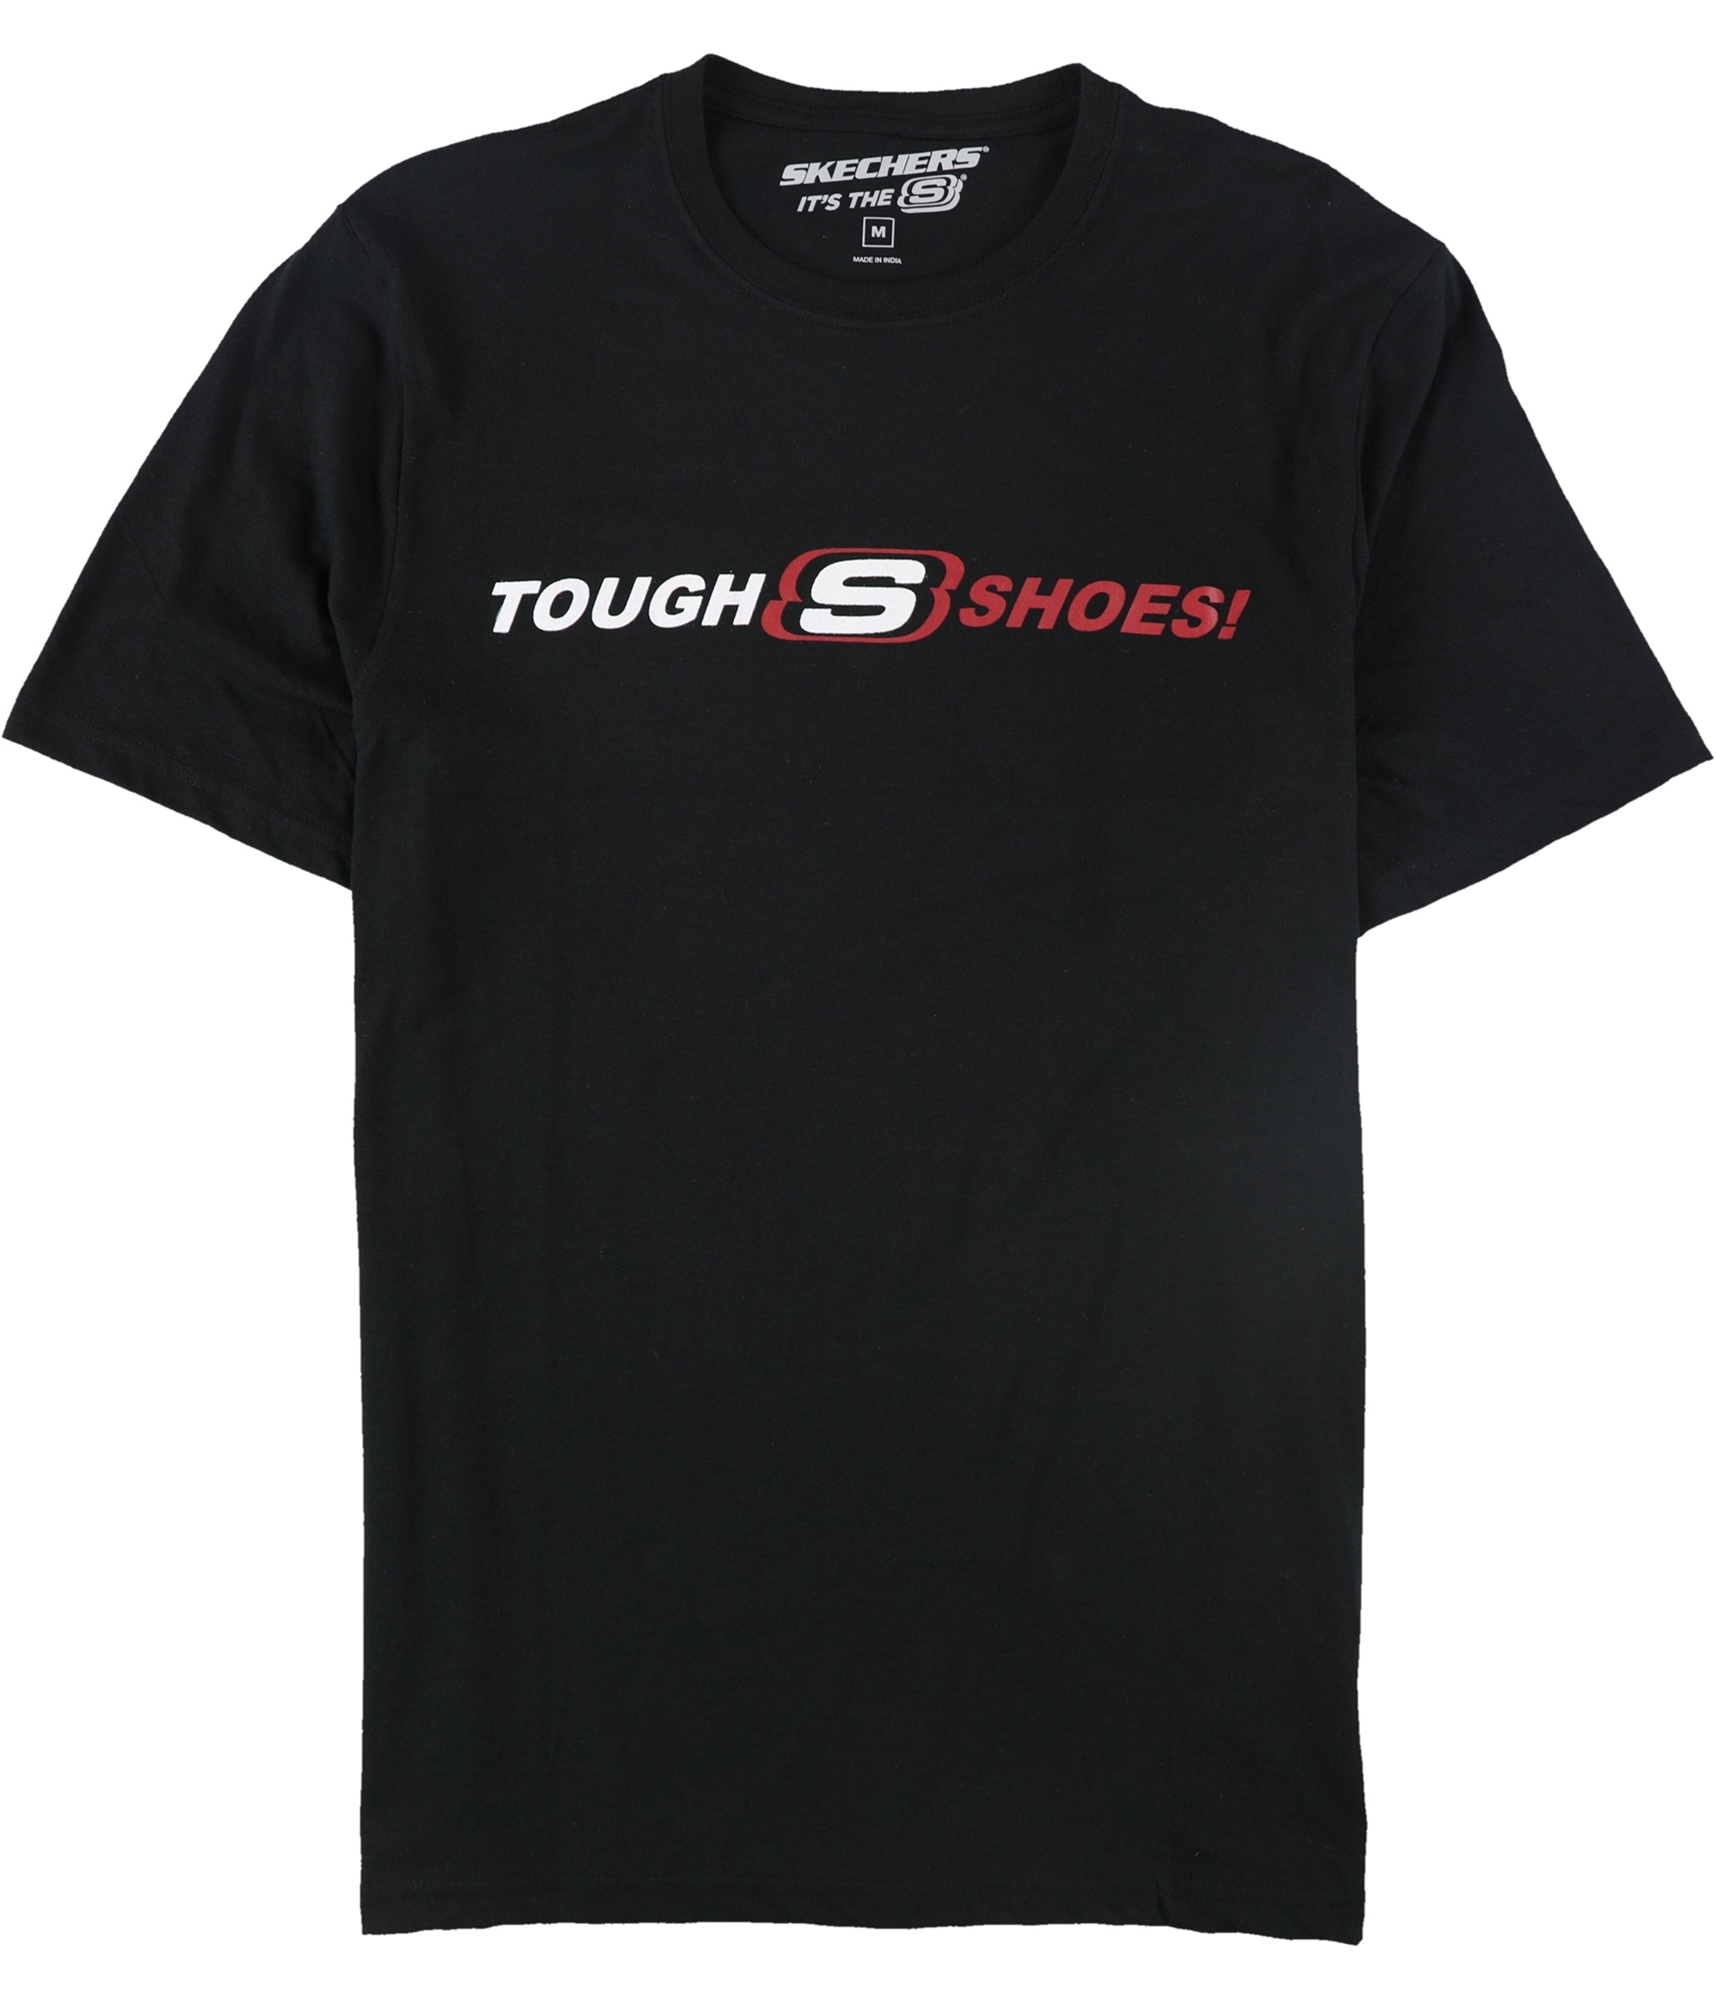 Mens Graphic Tough T-Shirt Tagsweekly | Skechers a Buy Shoes!